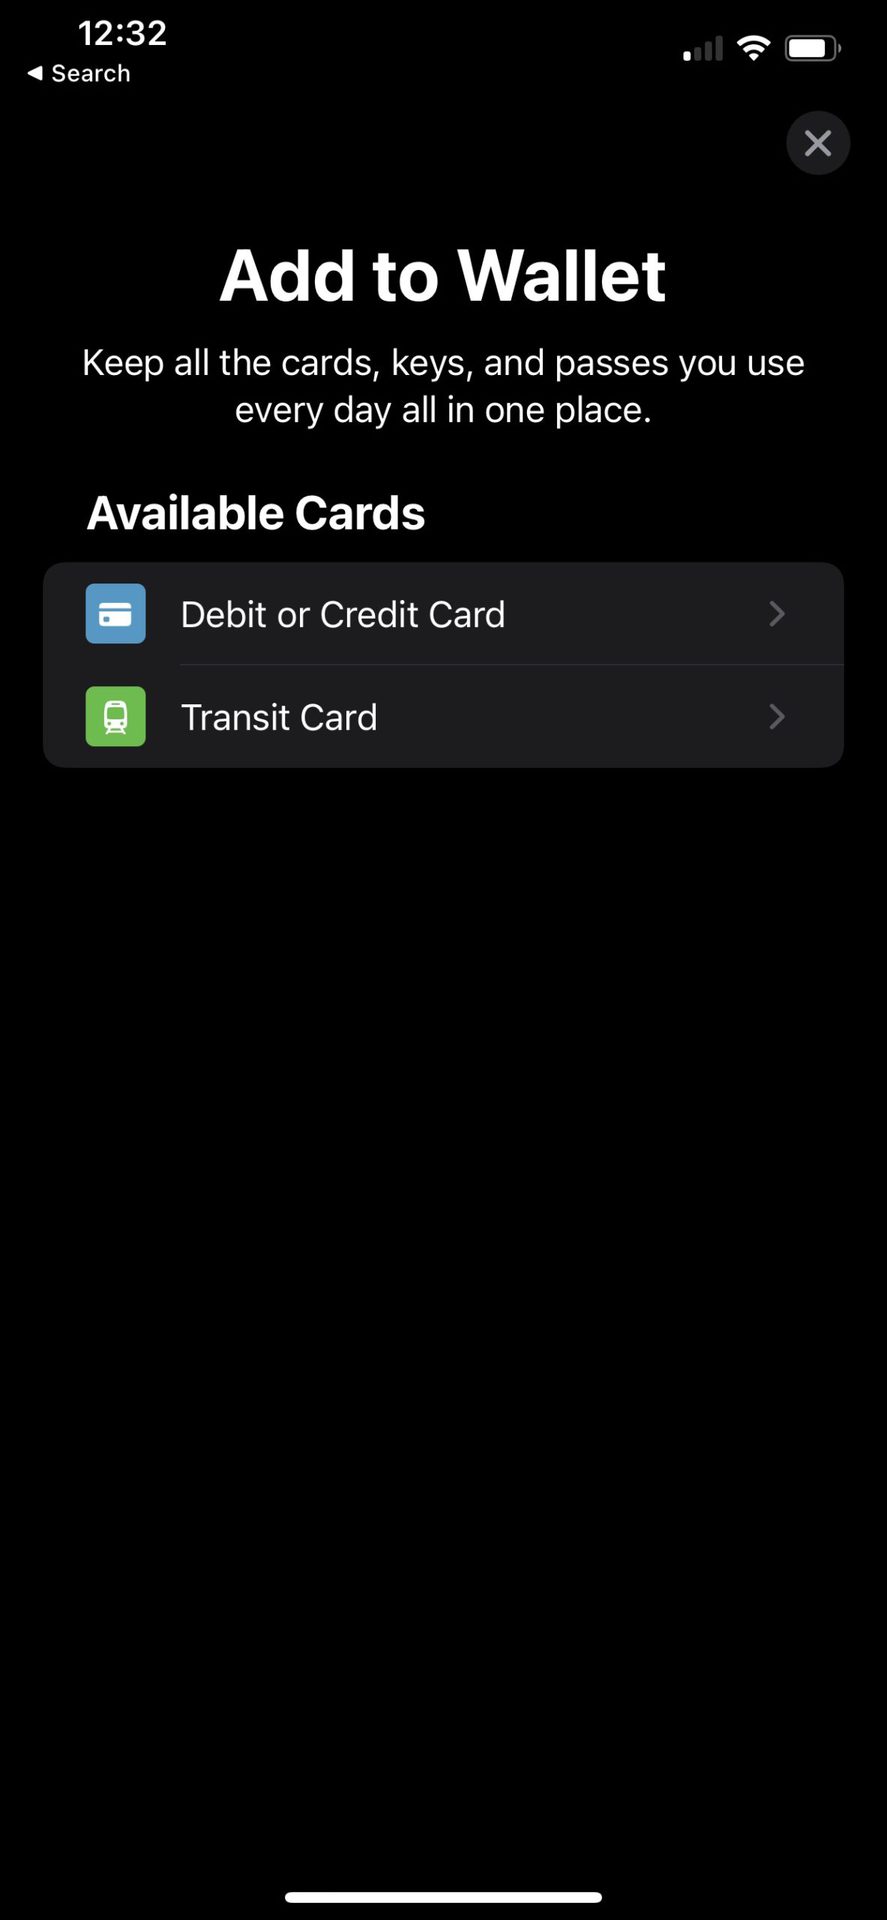 Apple Pay Available Cards